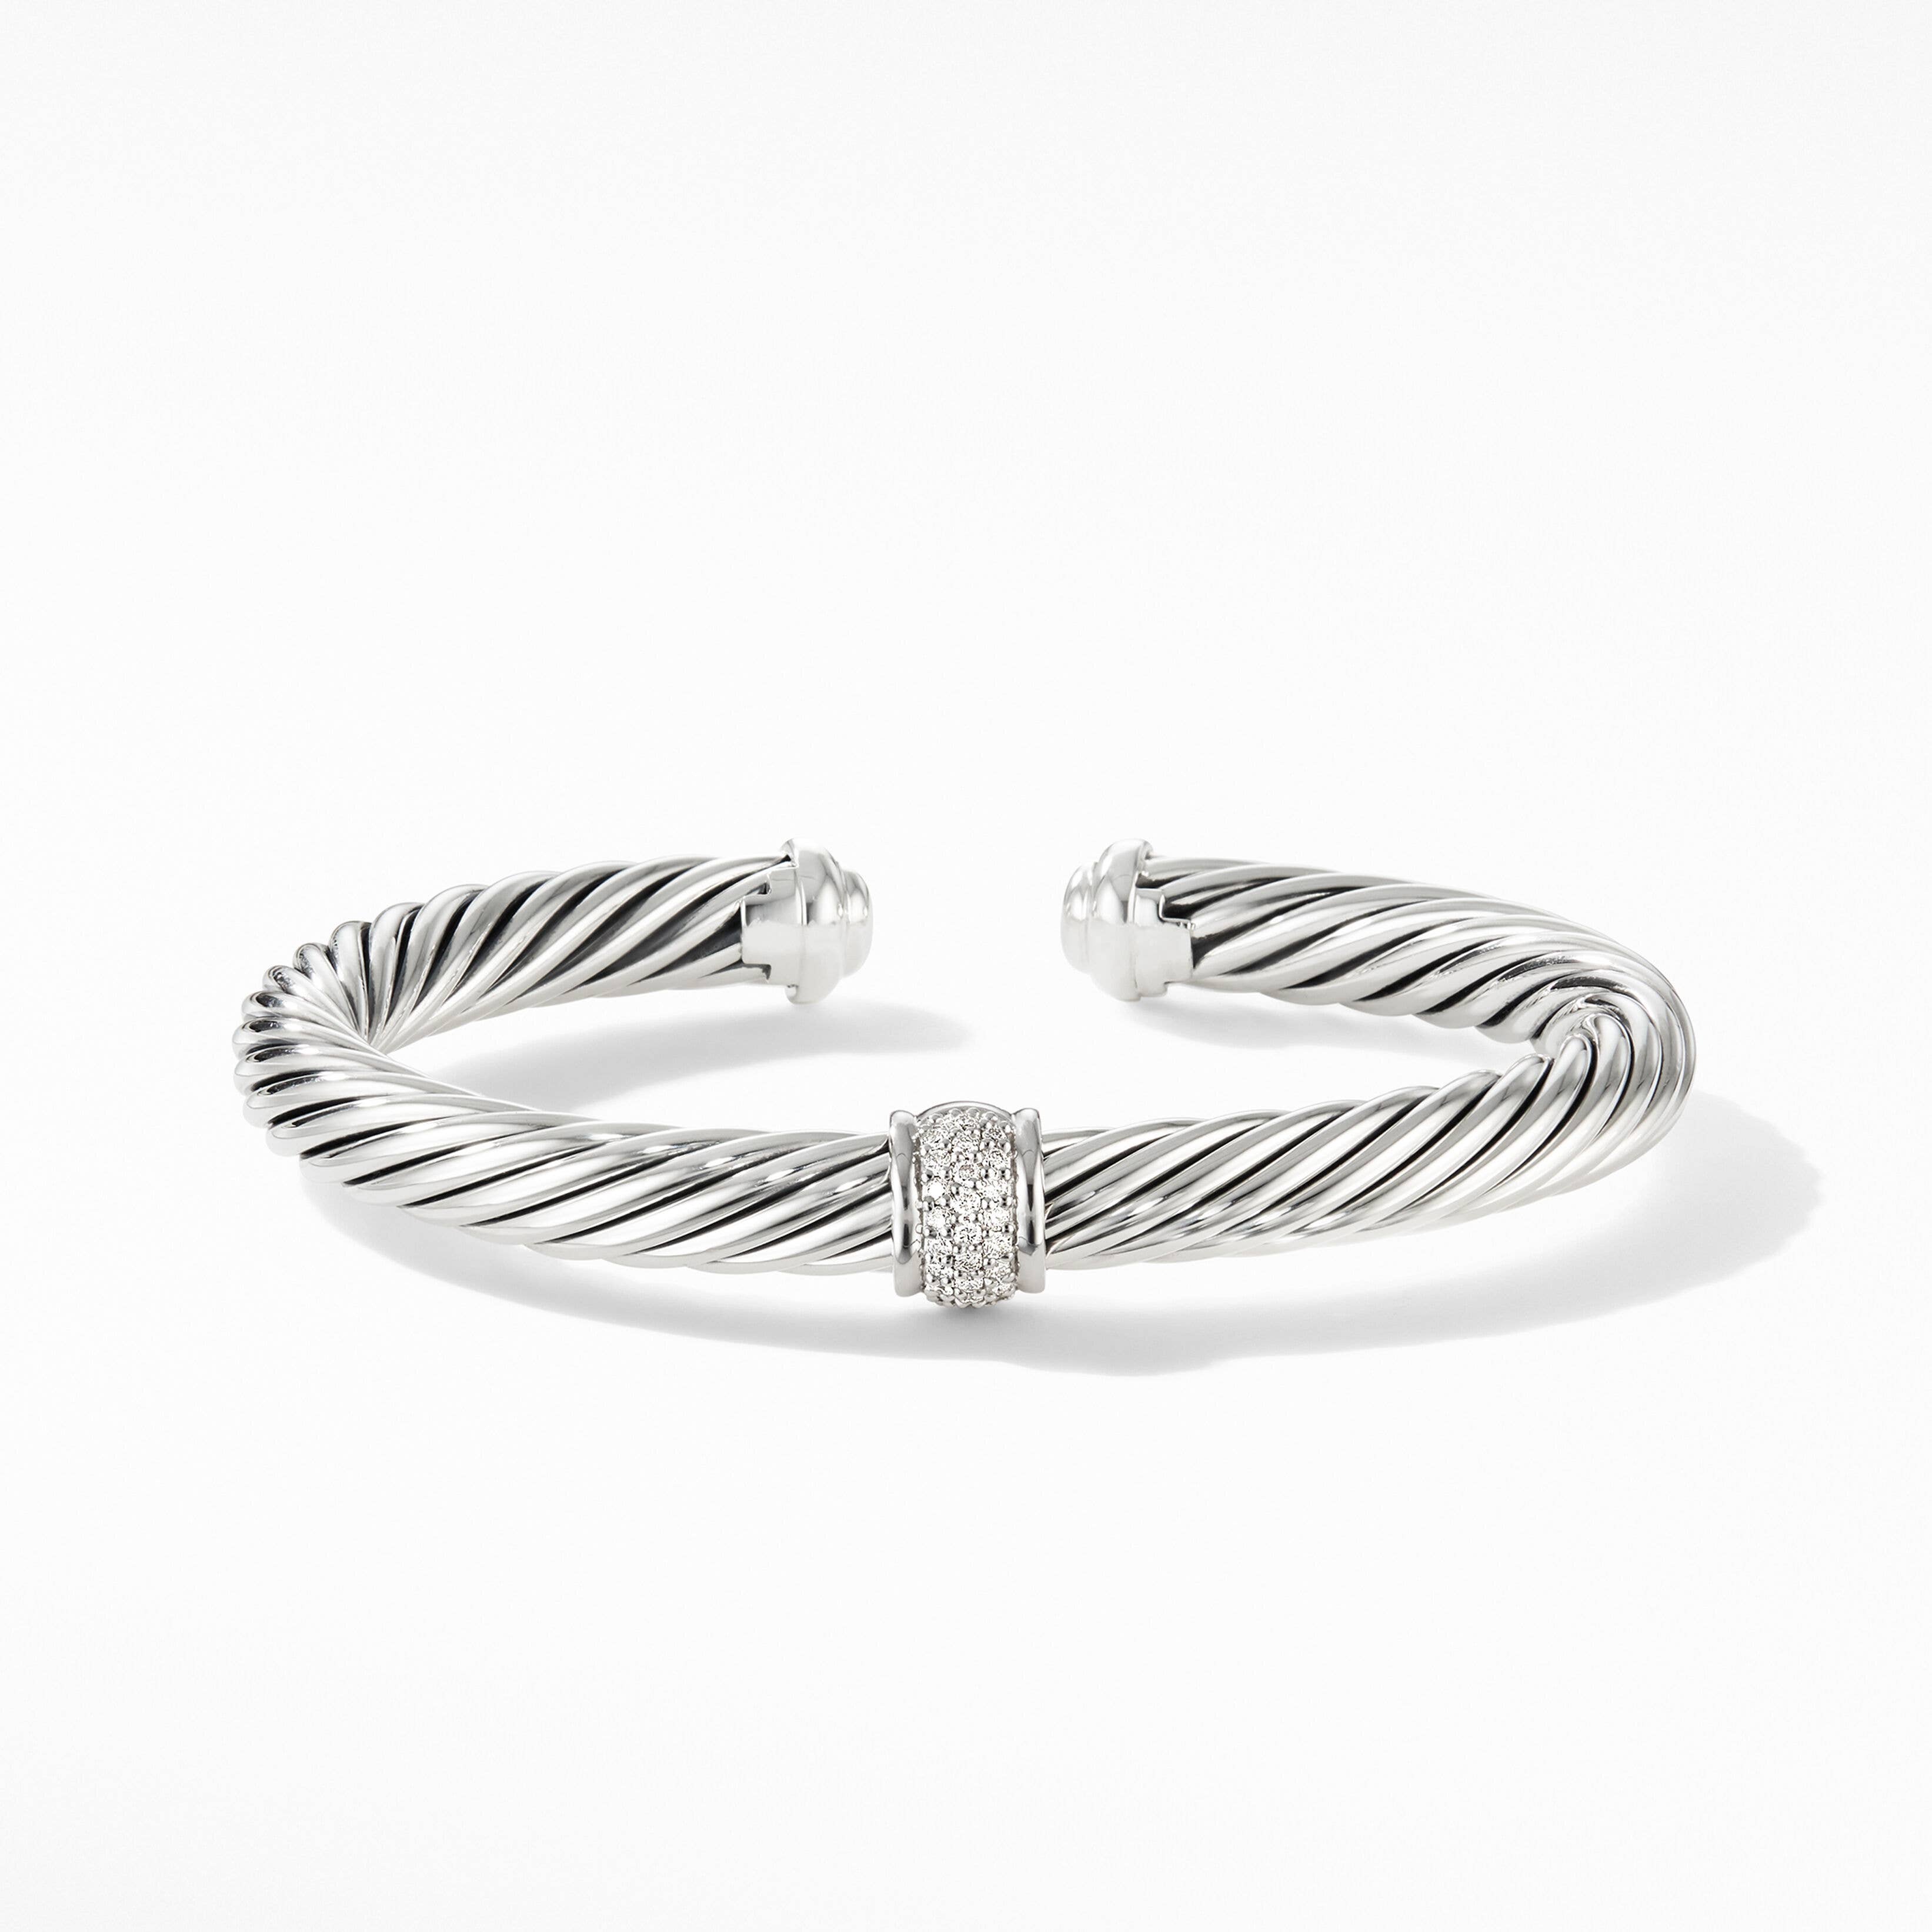 Cable Classics Bracelet in Sterling Silver with Pavé Diamond Station